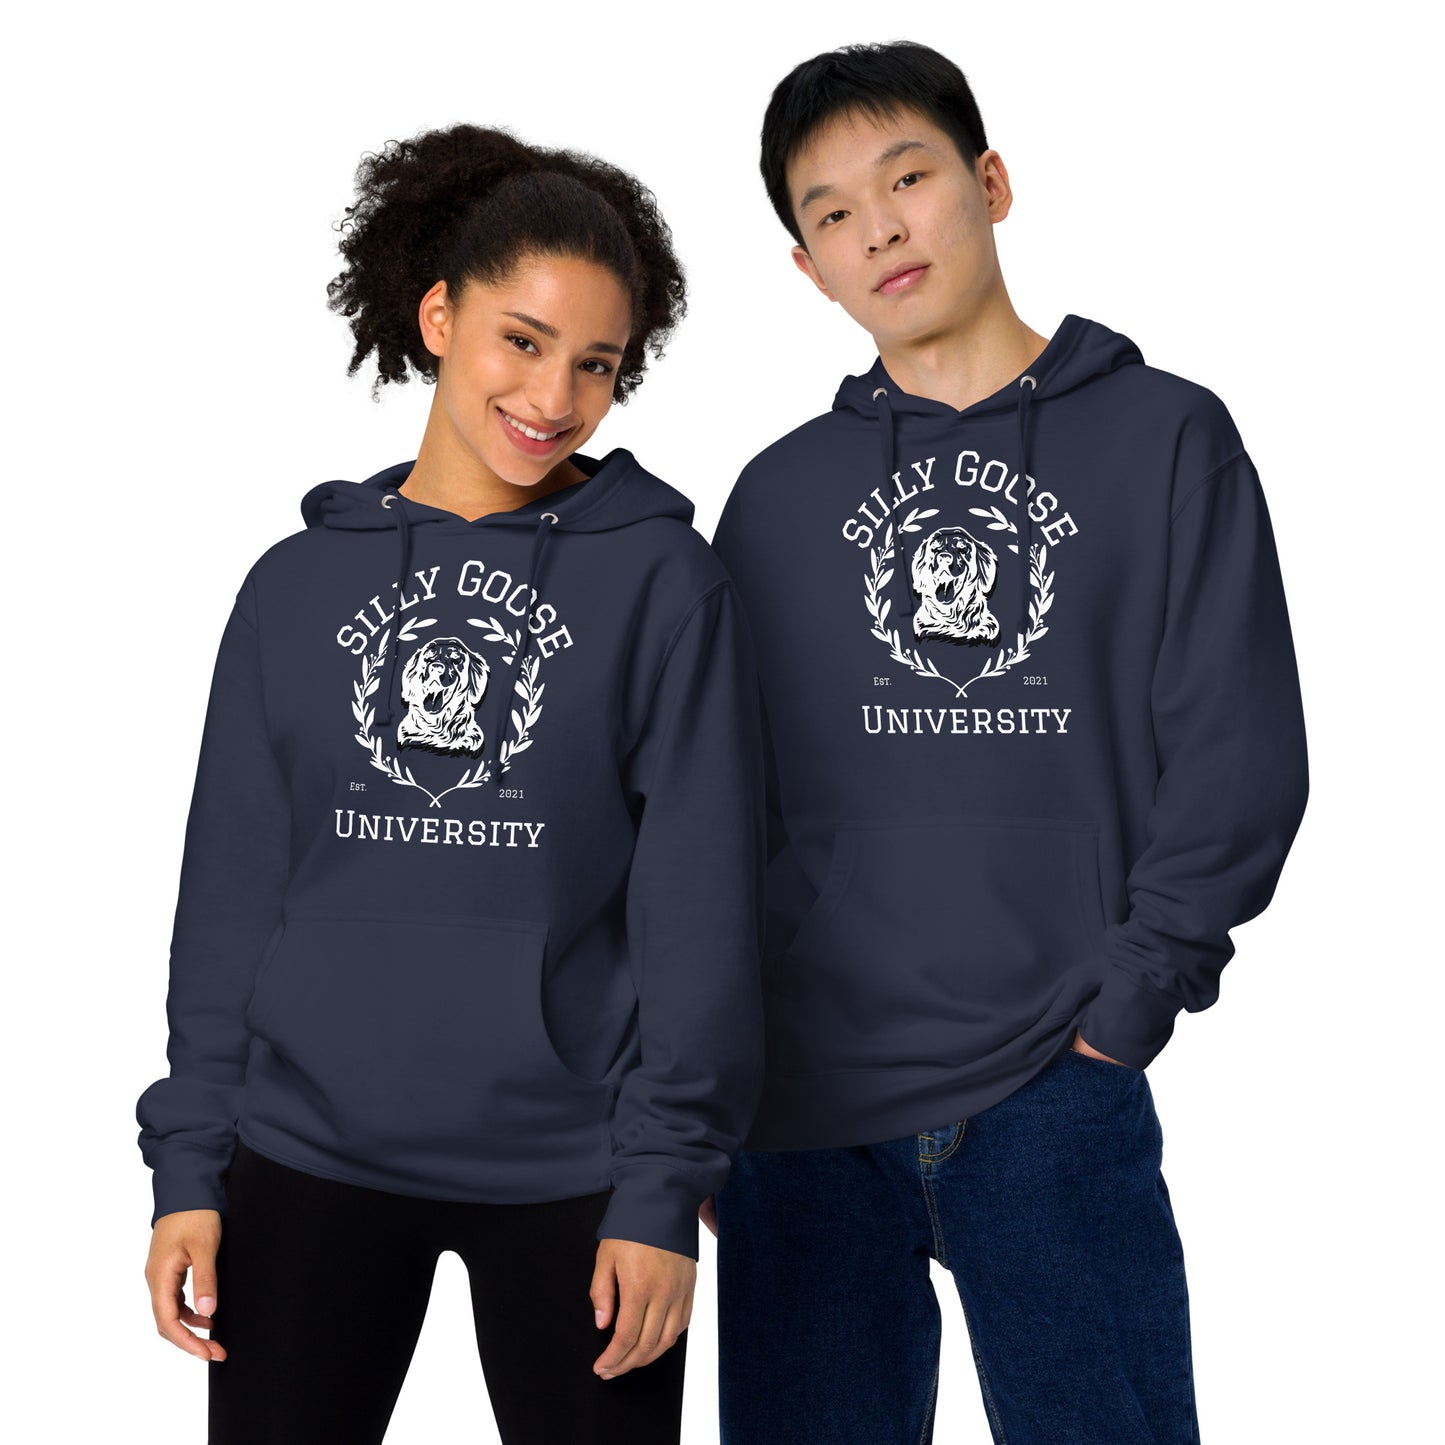 Silly Goose University Unisex midweight hoodie